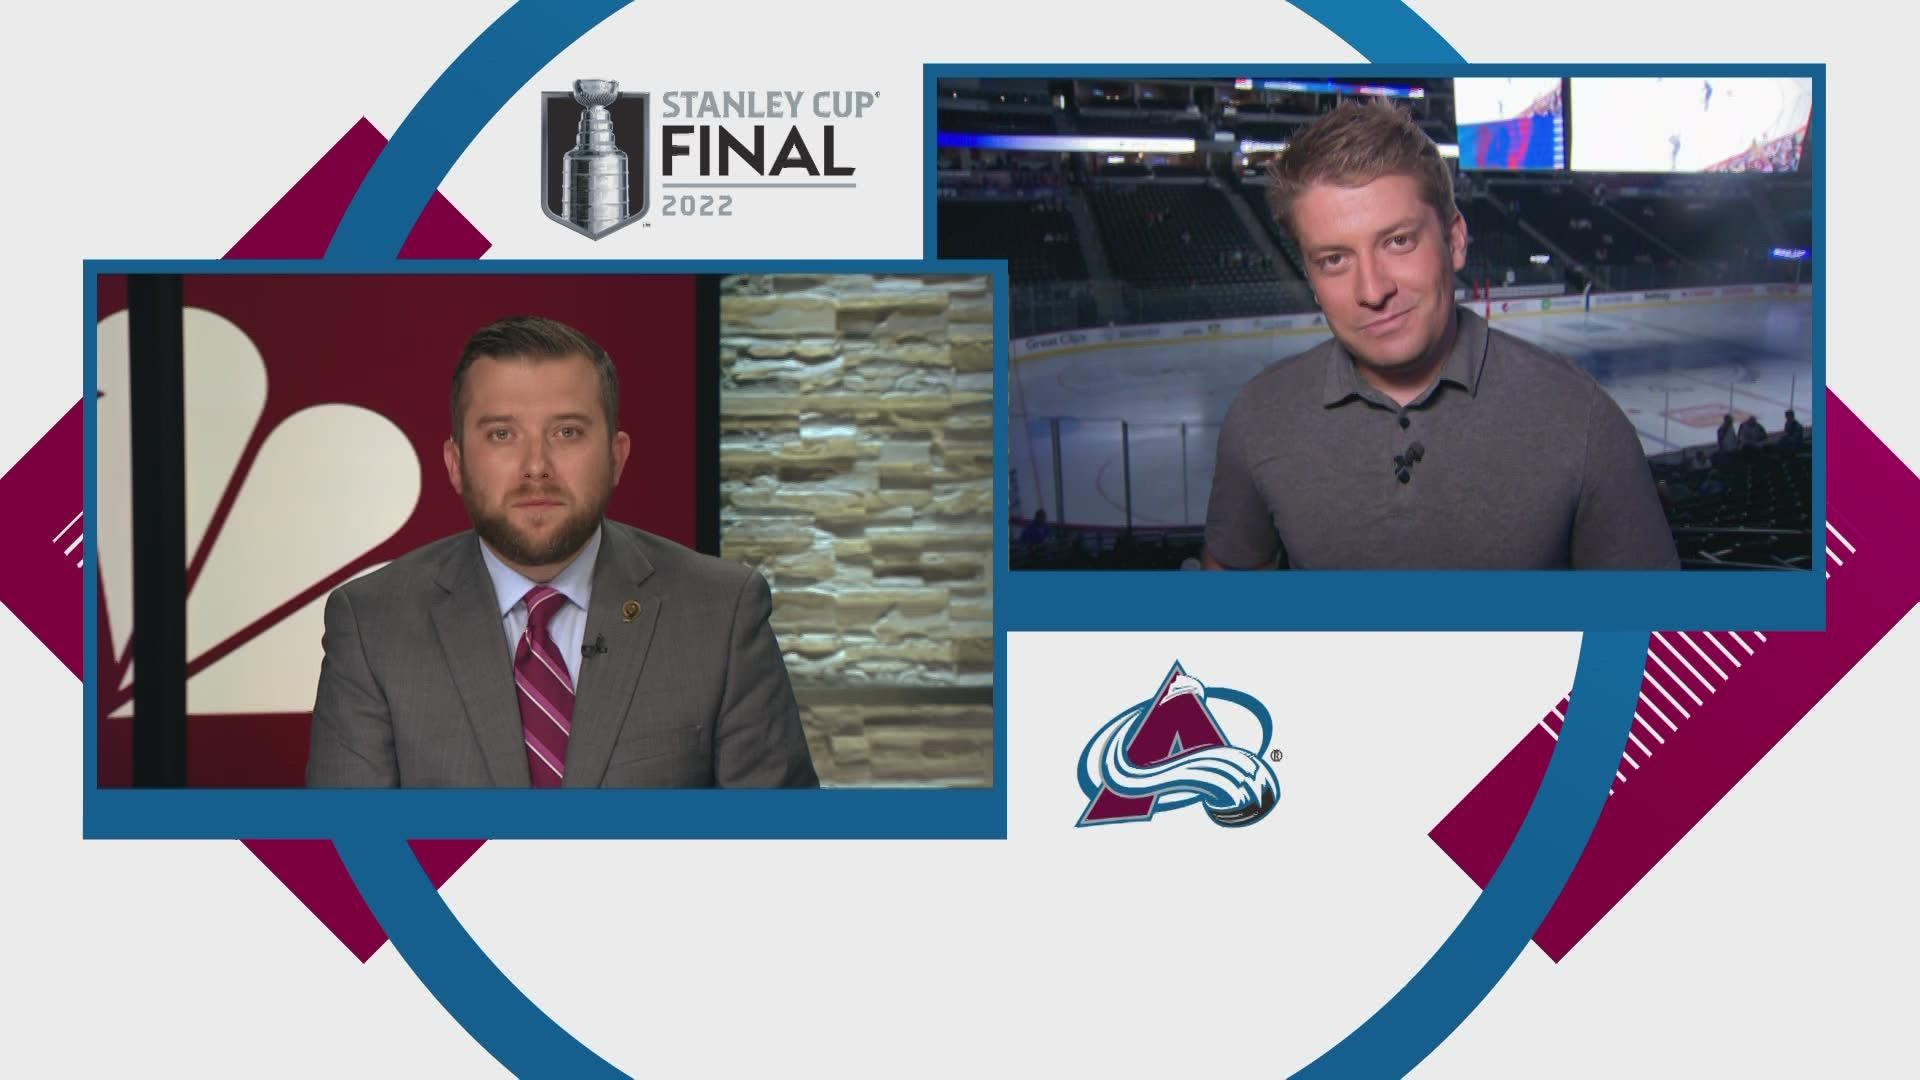 The biggest watch party to date in Denver will take place tonight at Ball Arena, where Avs fans can watch Game 6 against the Tampa Bay Lightning.